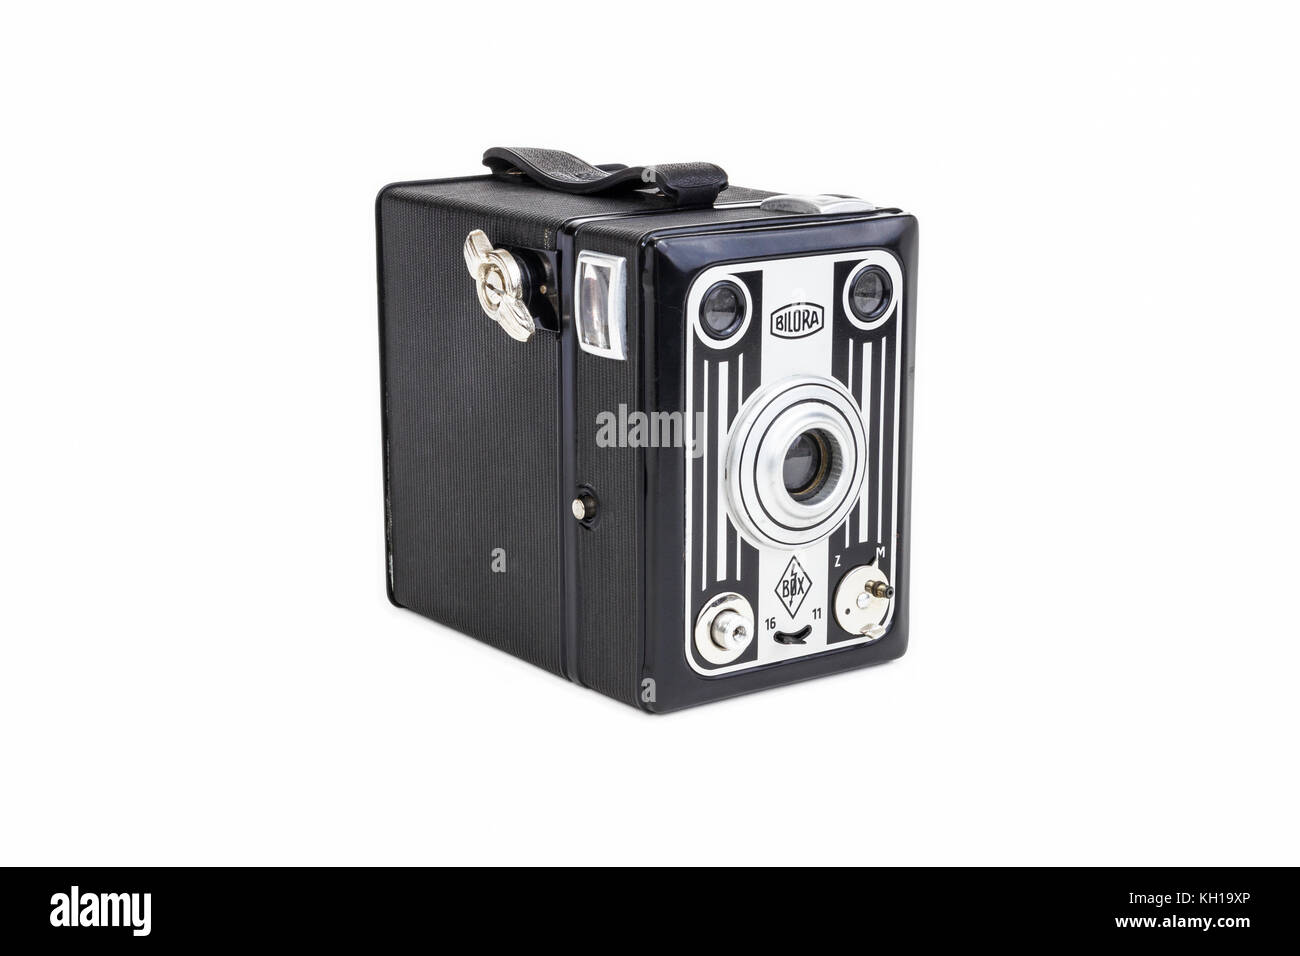 Bilora Blitz 120 roll film box camera, manufactured by Kurbi & Niggeloh, Germany, 1950s, isolated against a white background Stock Photo